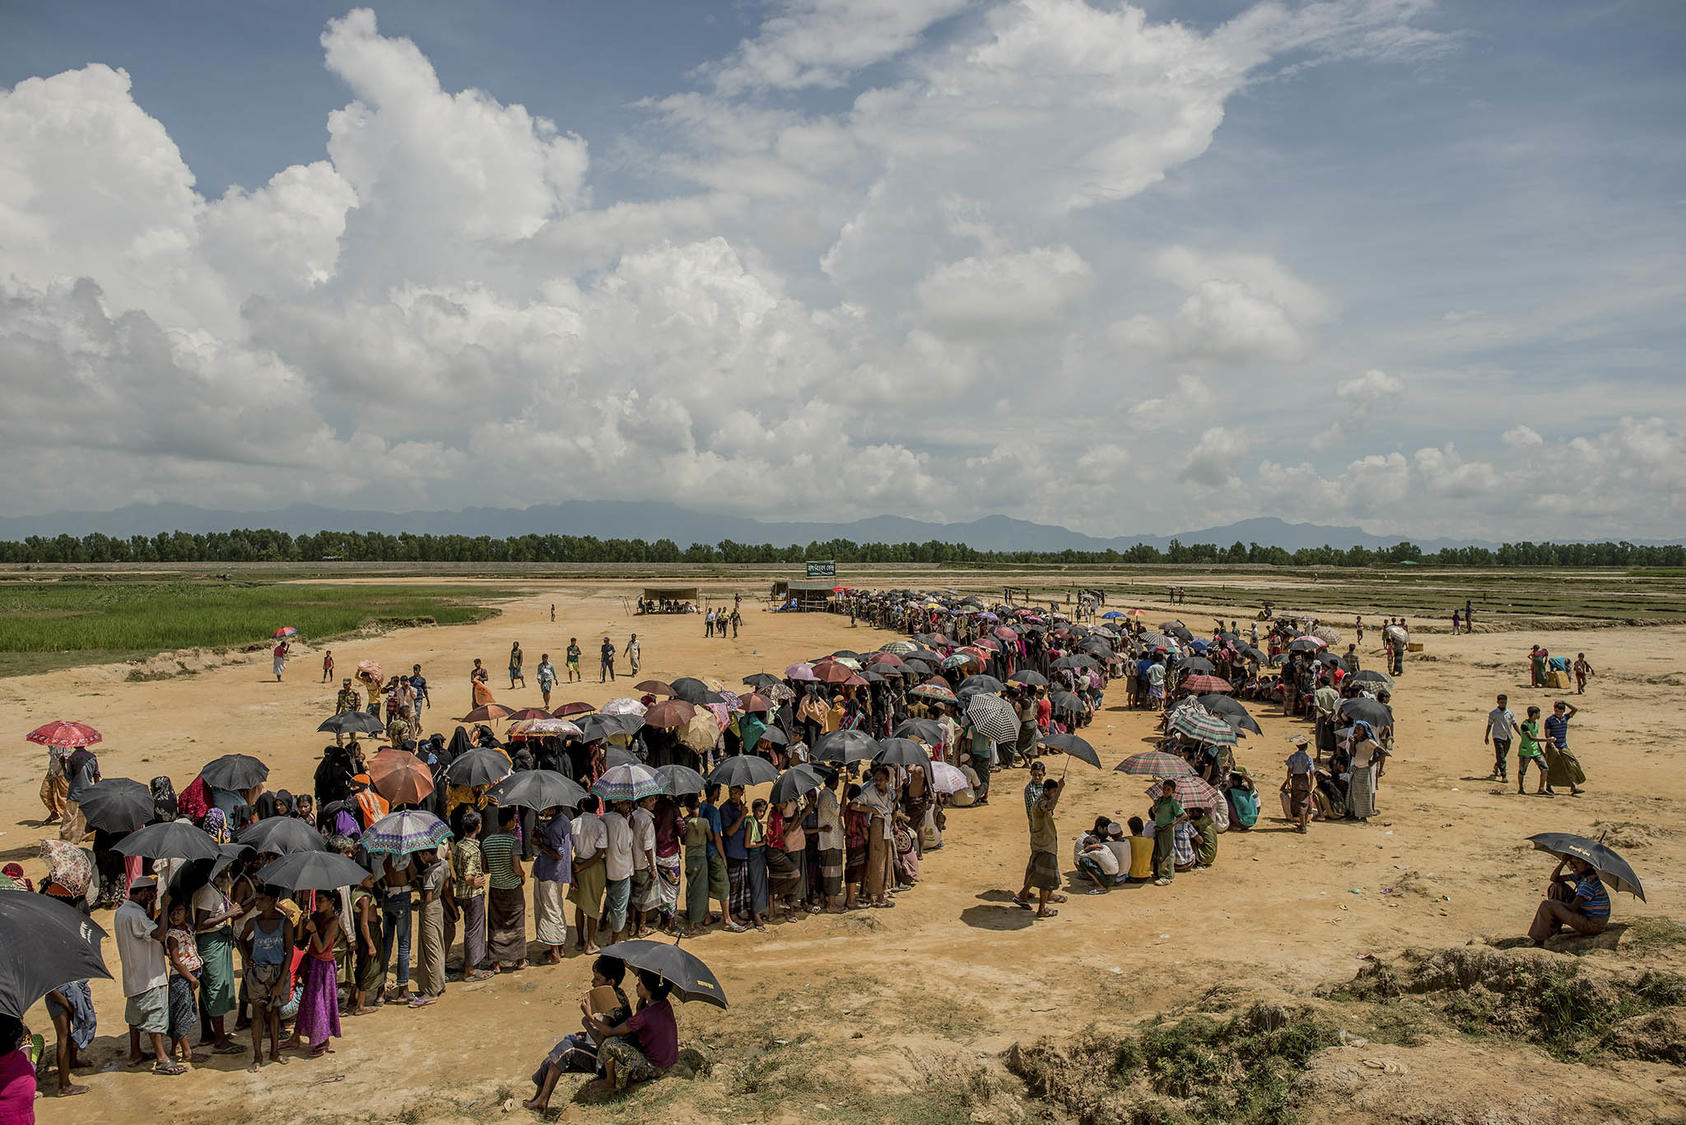 Refugees from Myanmar’s Rakhine State line up to register near a refugee camp in Cox’s Bazar, Bangladesh, on September 26, 2017. (Photo by Tomas Munita/New York Times)